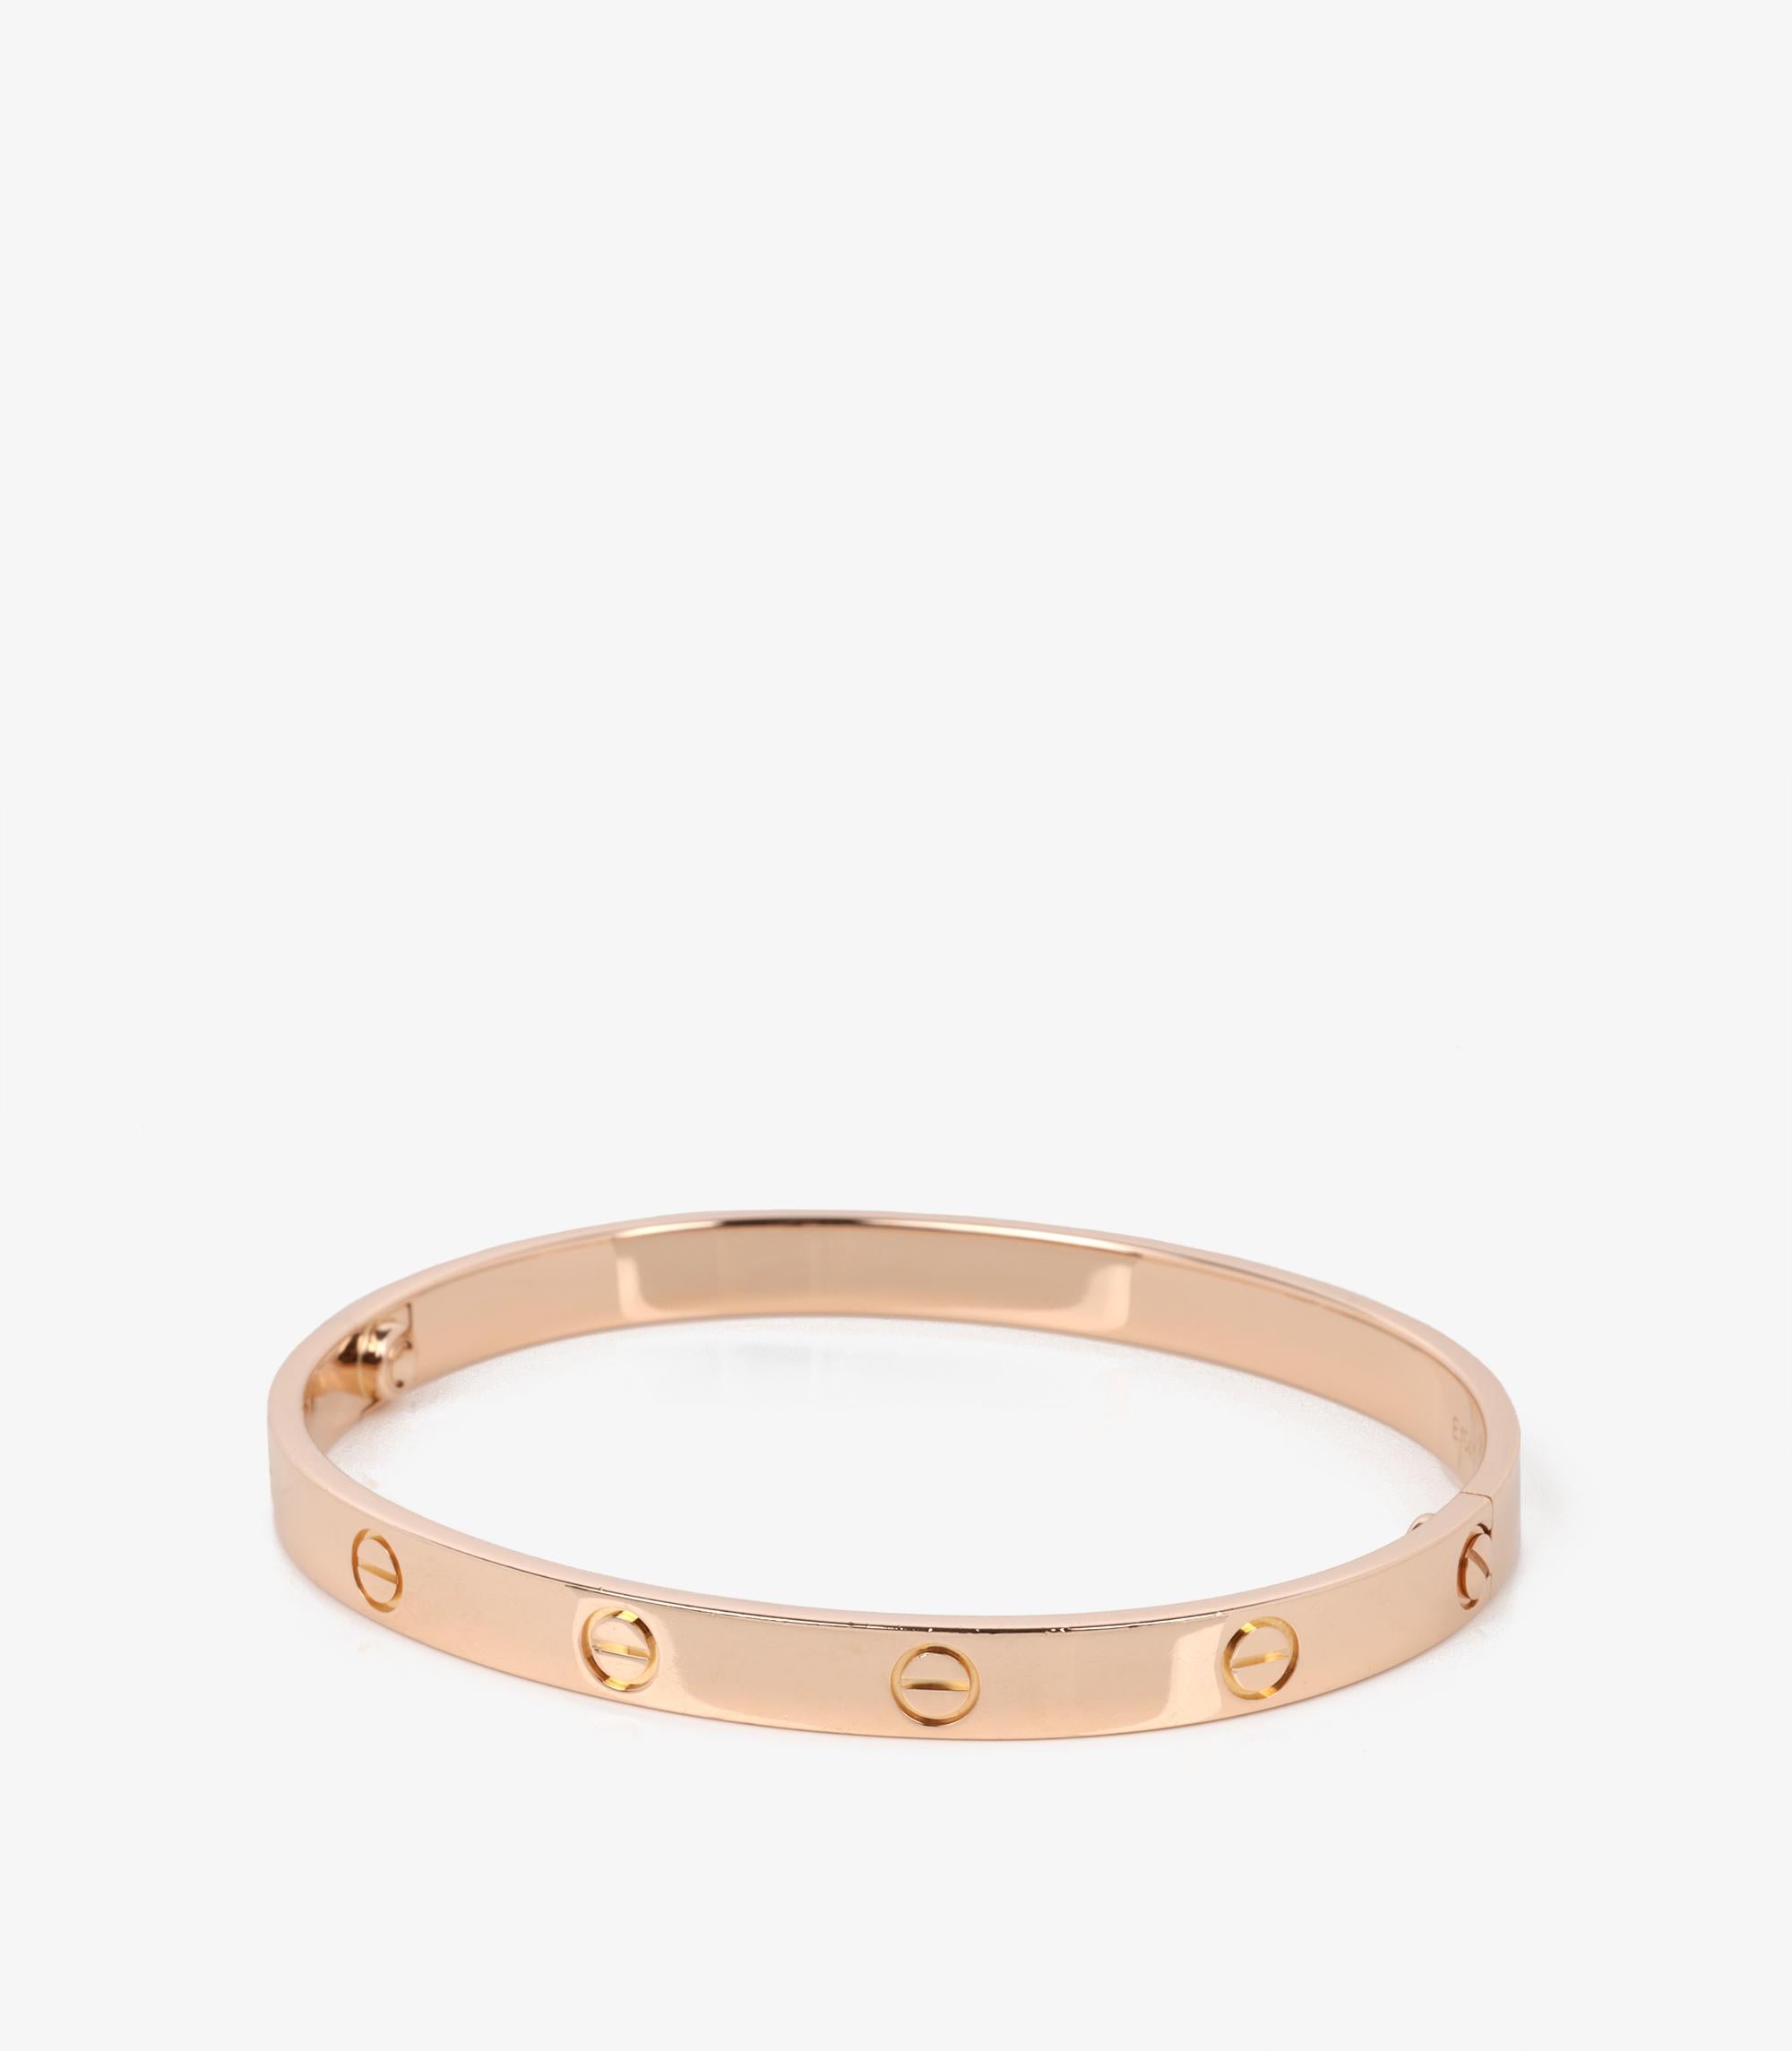 Cartier 18ct Rose Gold Love Bangle For Sale 5